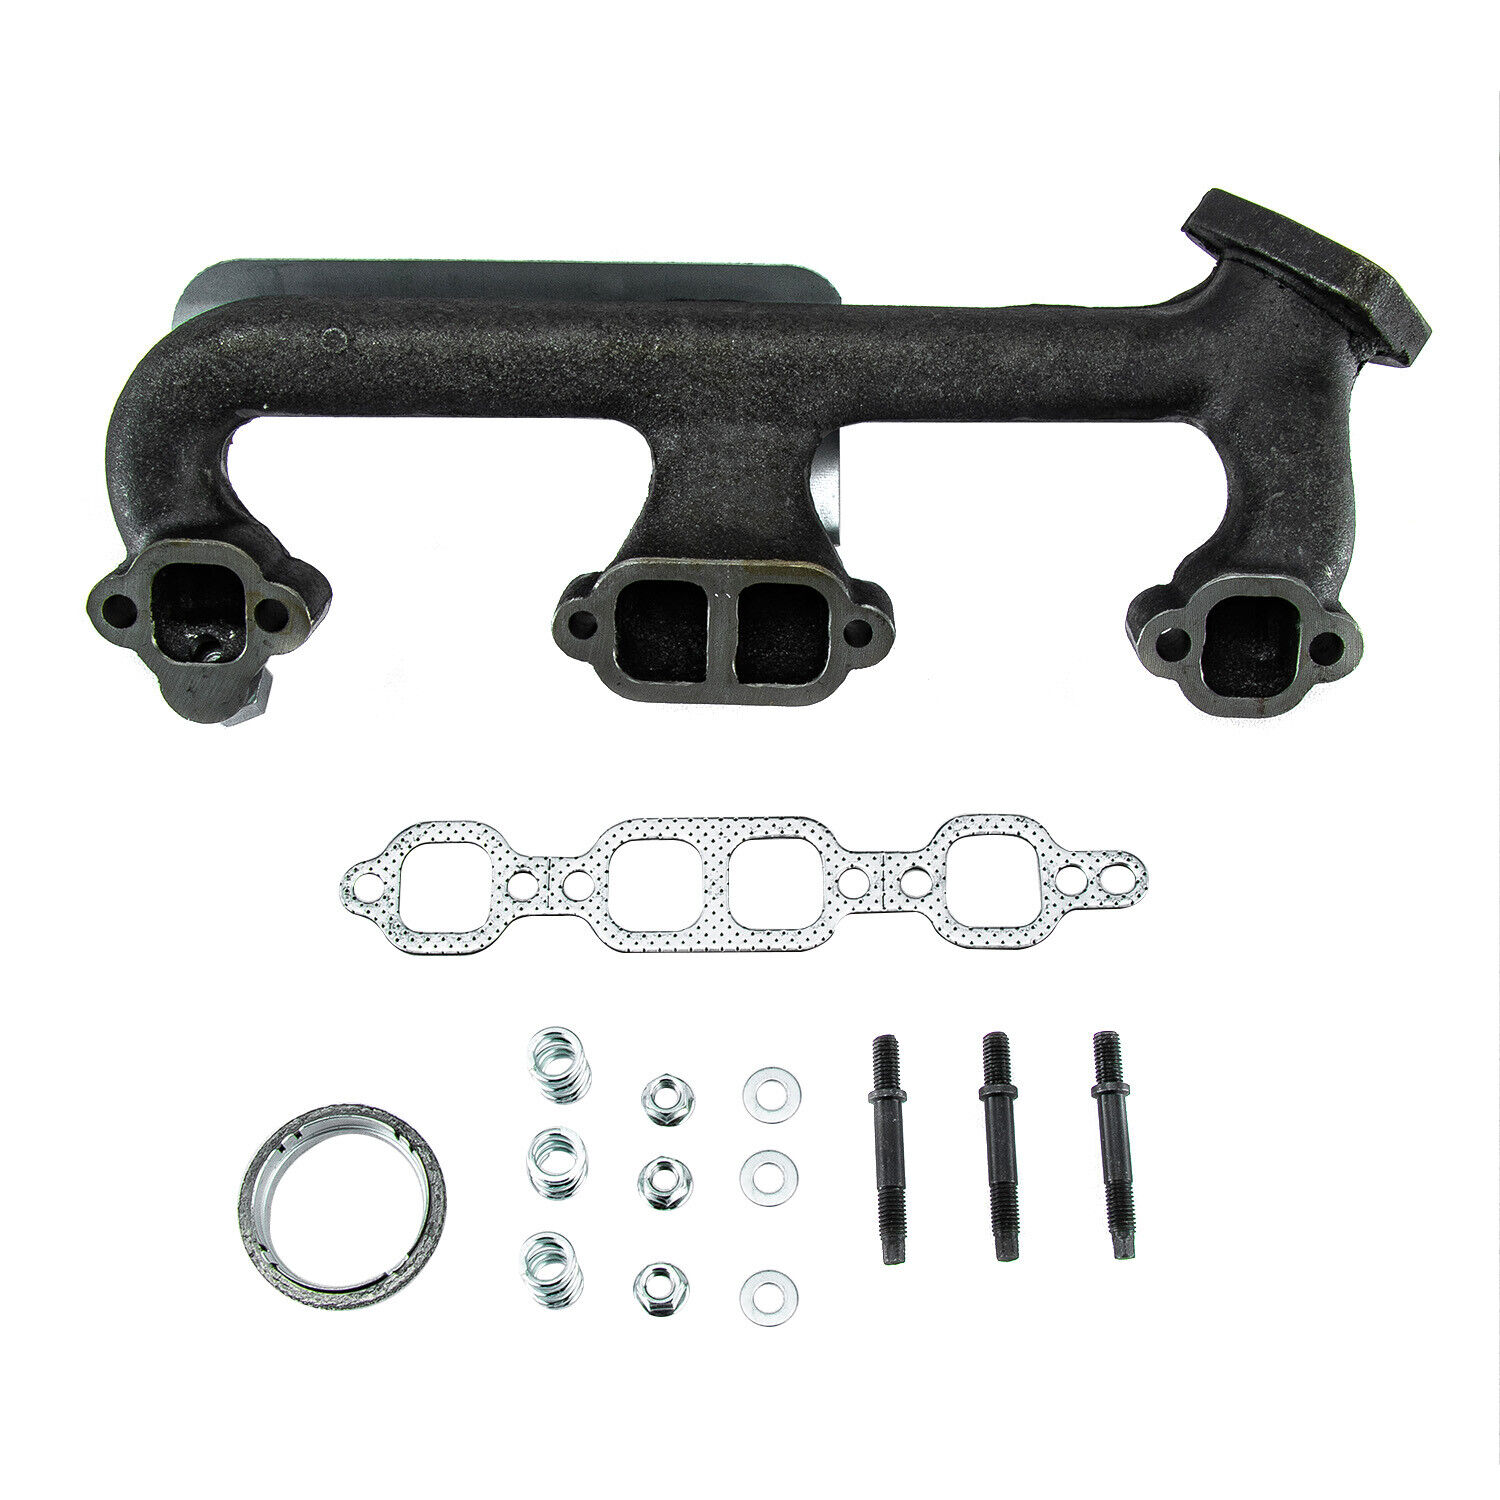 Exhaust Manifold For 1988-95 Chevy GMC C/K 1500 2500 Pickup 350 305 5.0L II